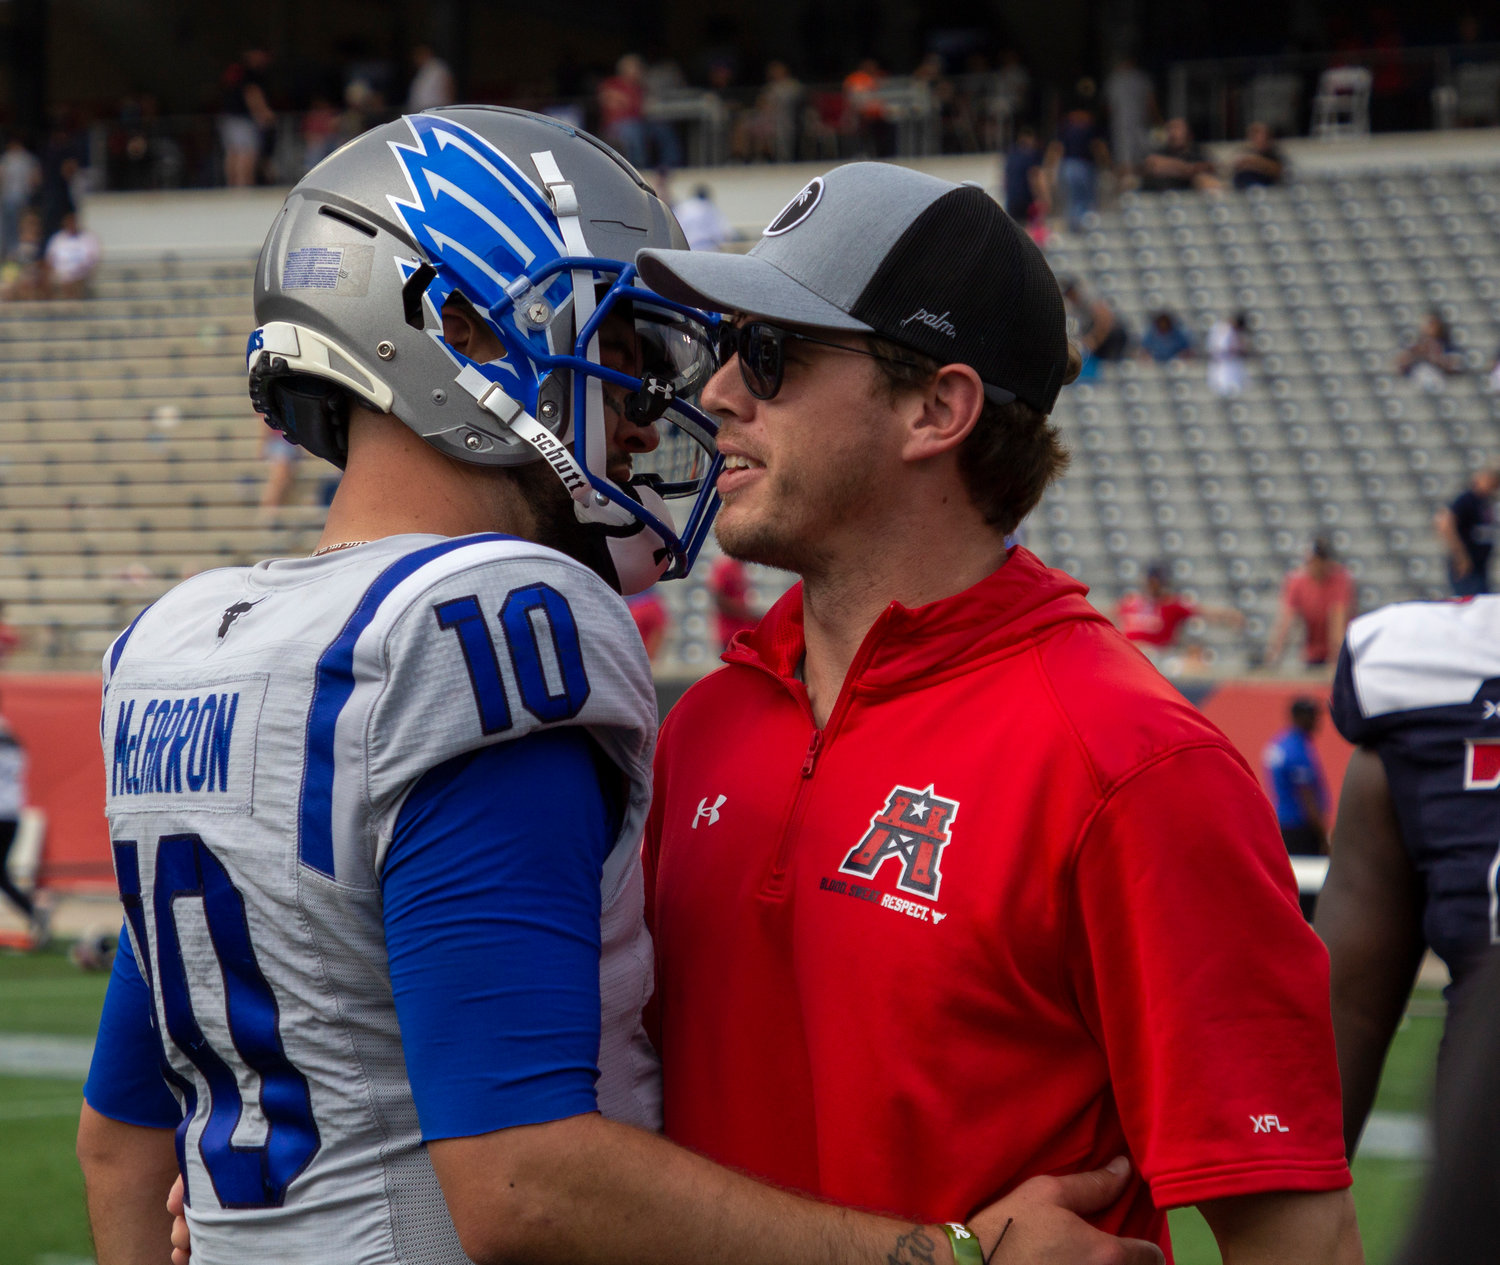 Battlehawks quarterback AJ McCarron and Roughneck quarterback Brandon Silvers share an embrace after Sunday’s game in Week 7 of the XFL season between Houston and St. Louis. TDECU Stadium served as the reunion spot for the pair of lower Alabama quarterbacks who share an offseason trainer and quarterback coach.